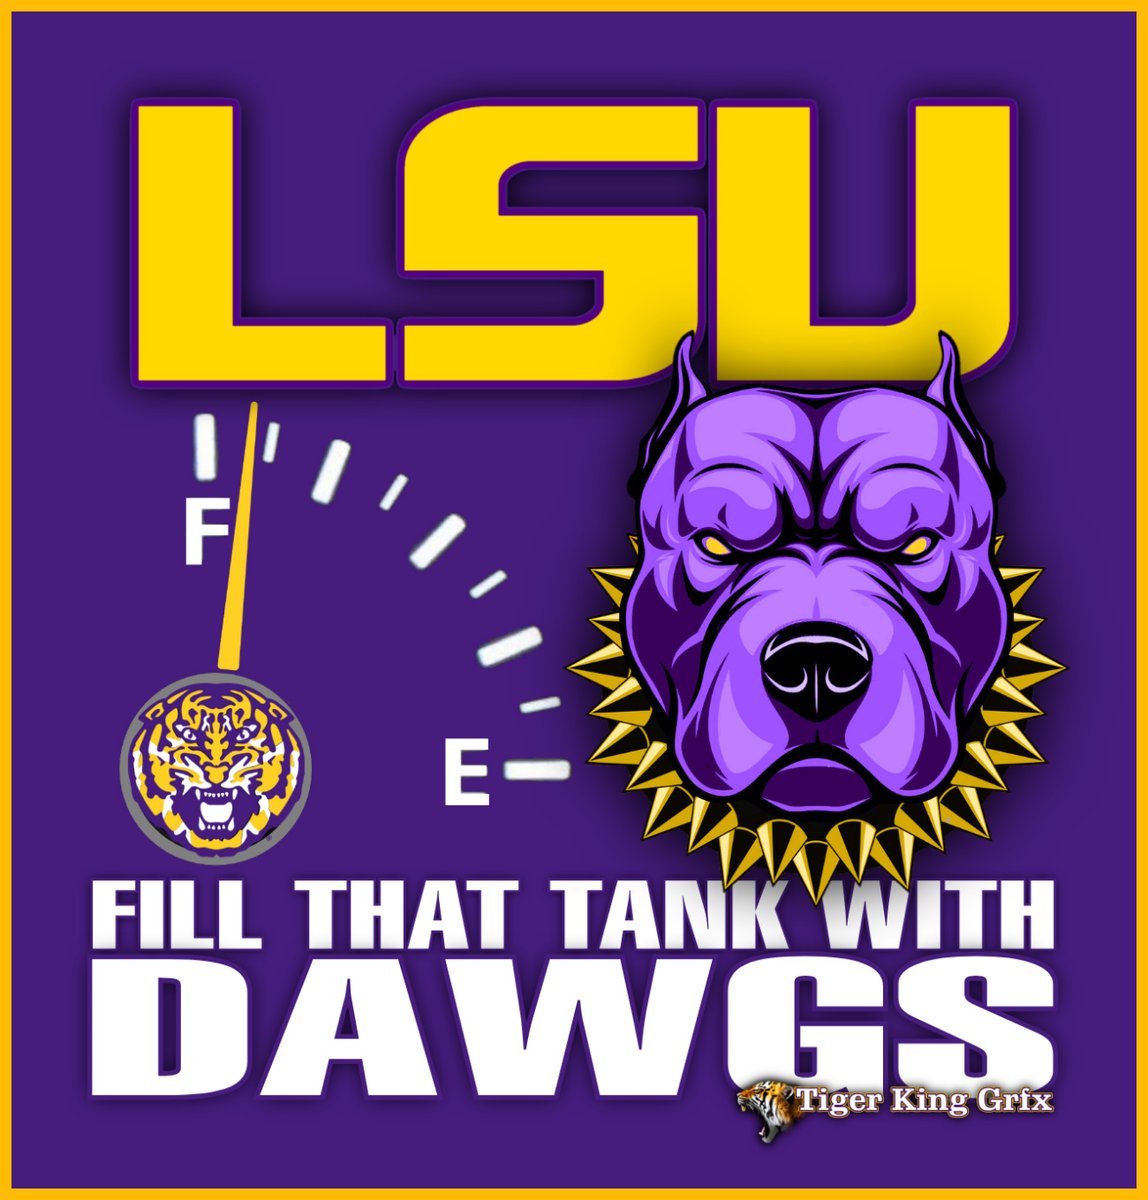 @iGREDUS #BootUp 
Fill that tank with DAWGS.